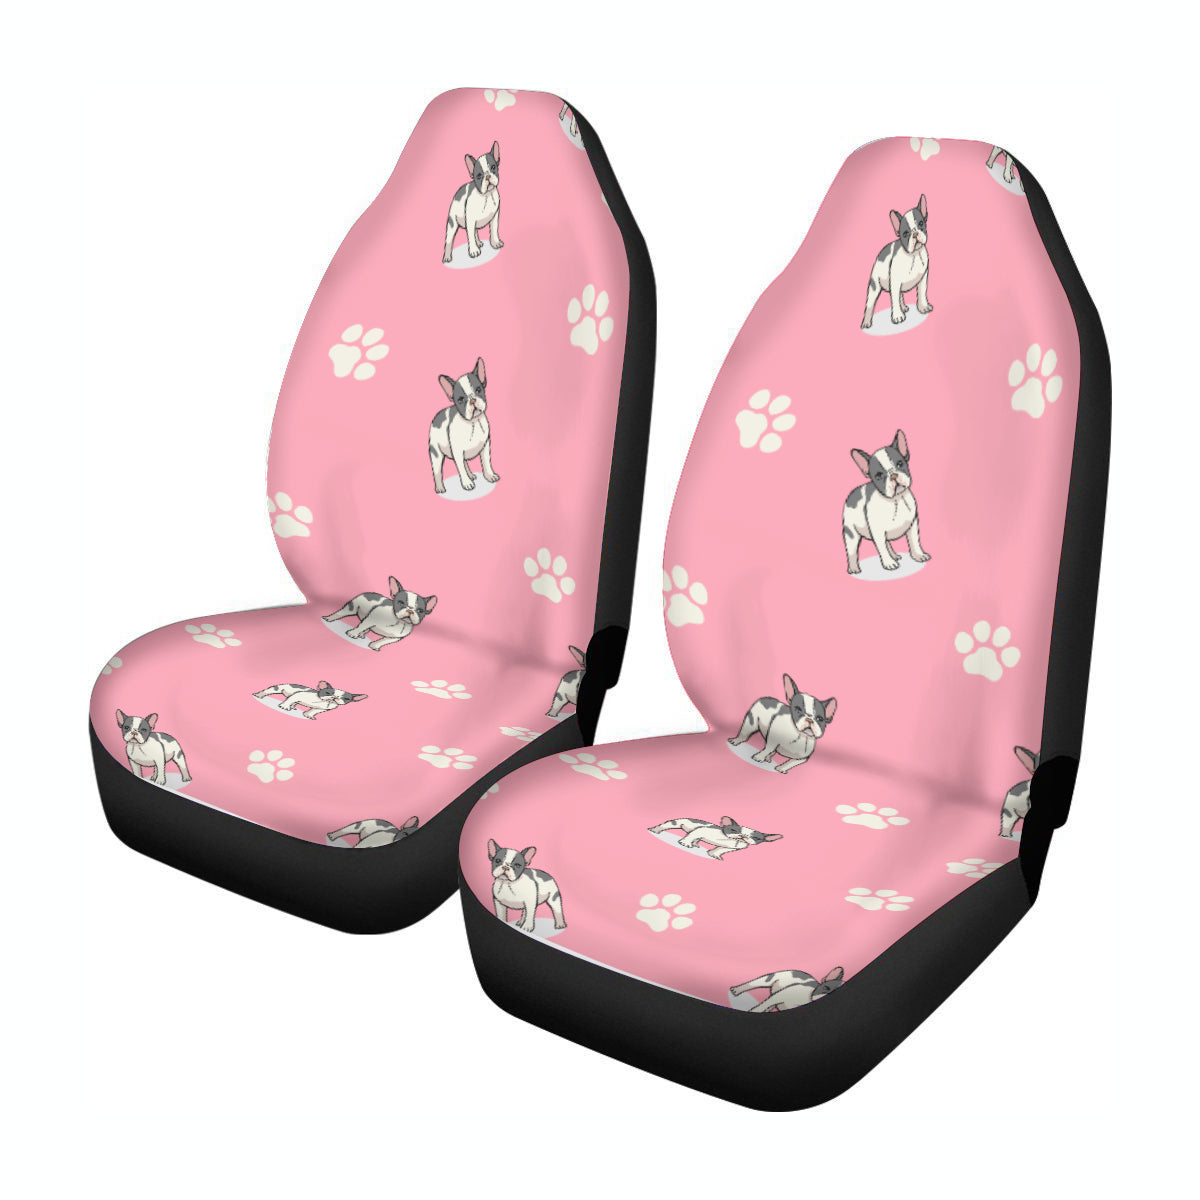 MILLIE - Universal Car Seat Cover - Frenchie Bulldog Shop